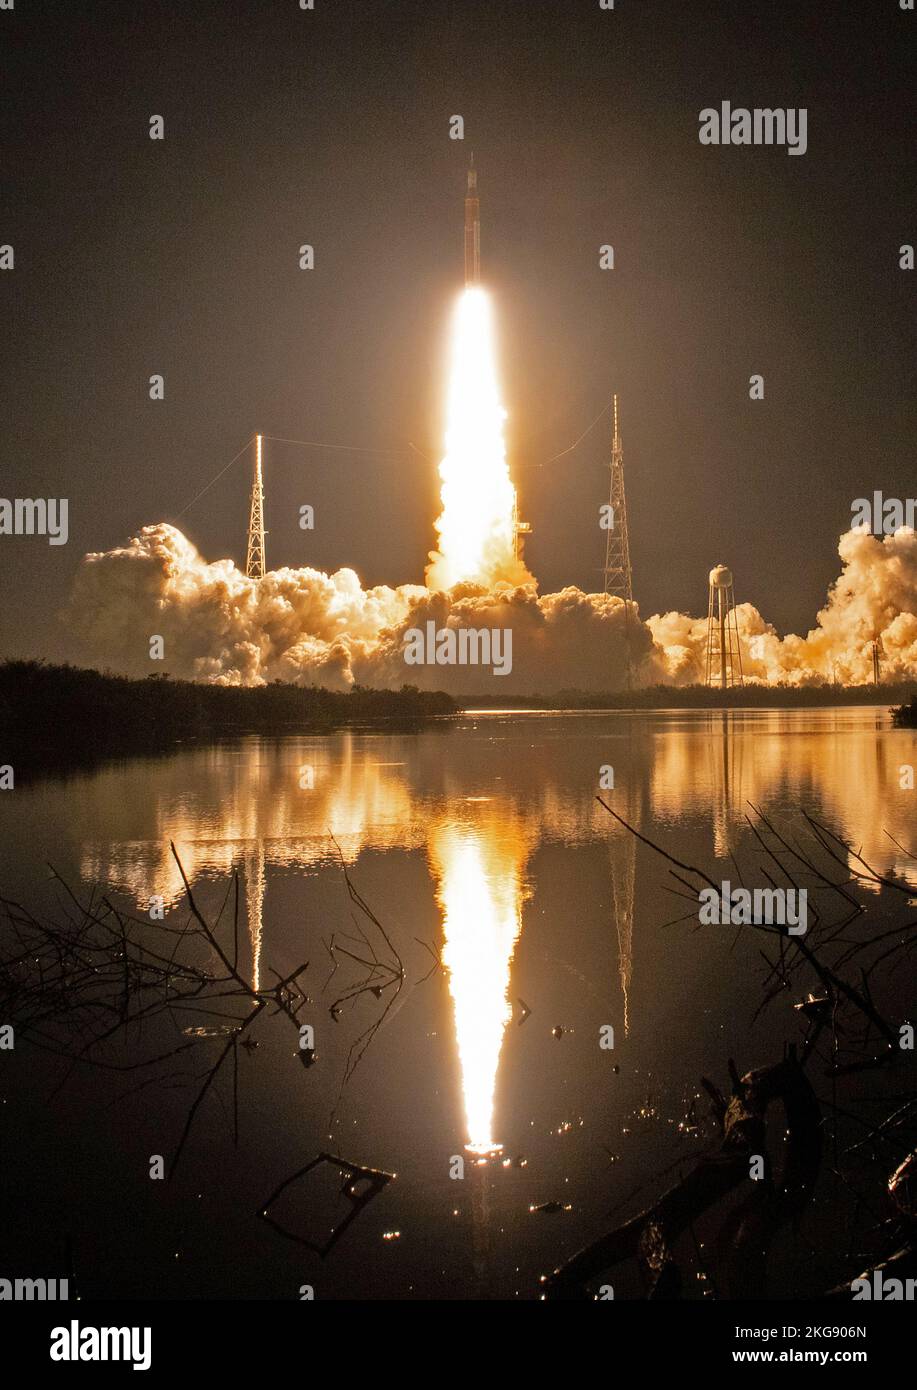 KENNEDY SPACE CE|NTRE, FLORIDA, USA - 16 November 2022 - NASA’s Space Launch System rocket carrying the Orion spacecraft launches on the Artemis I fli Stock Photo